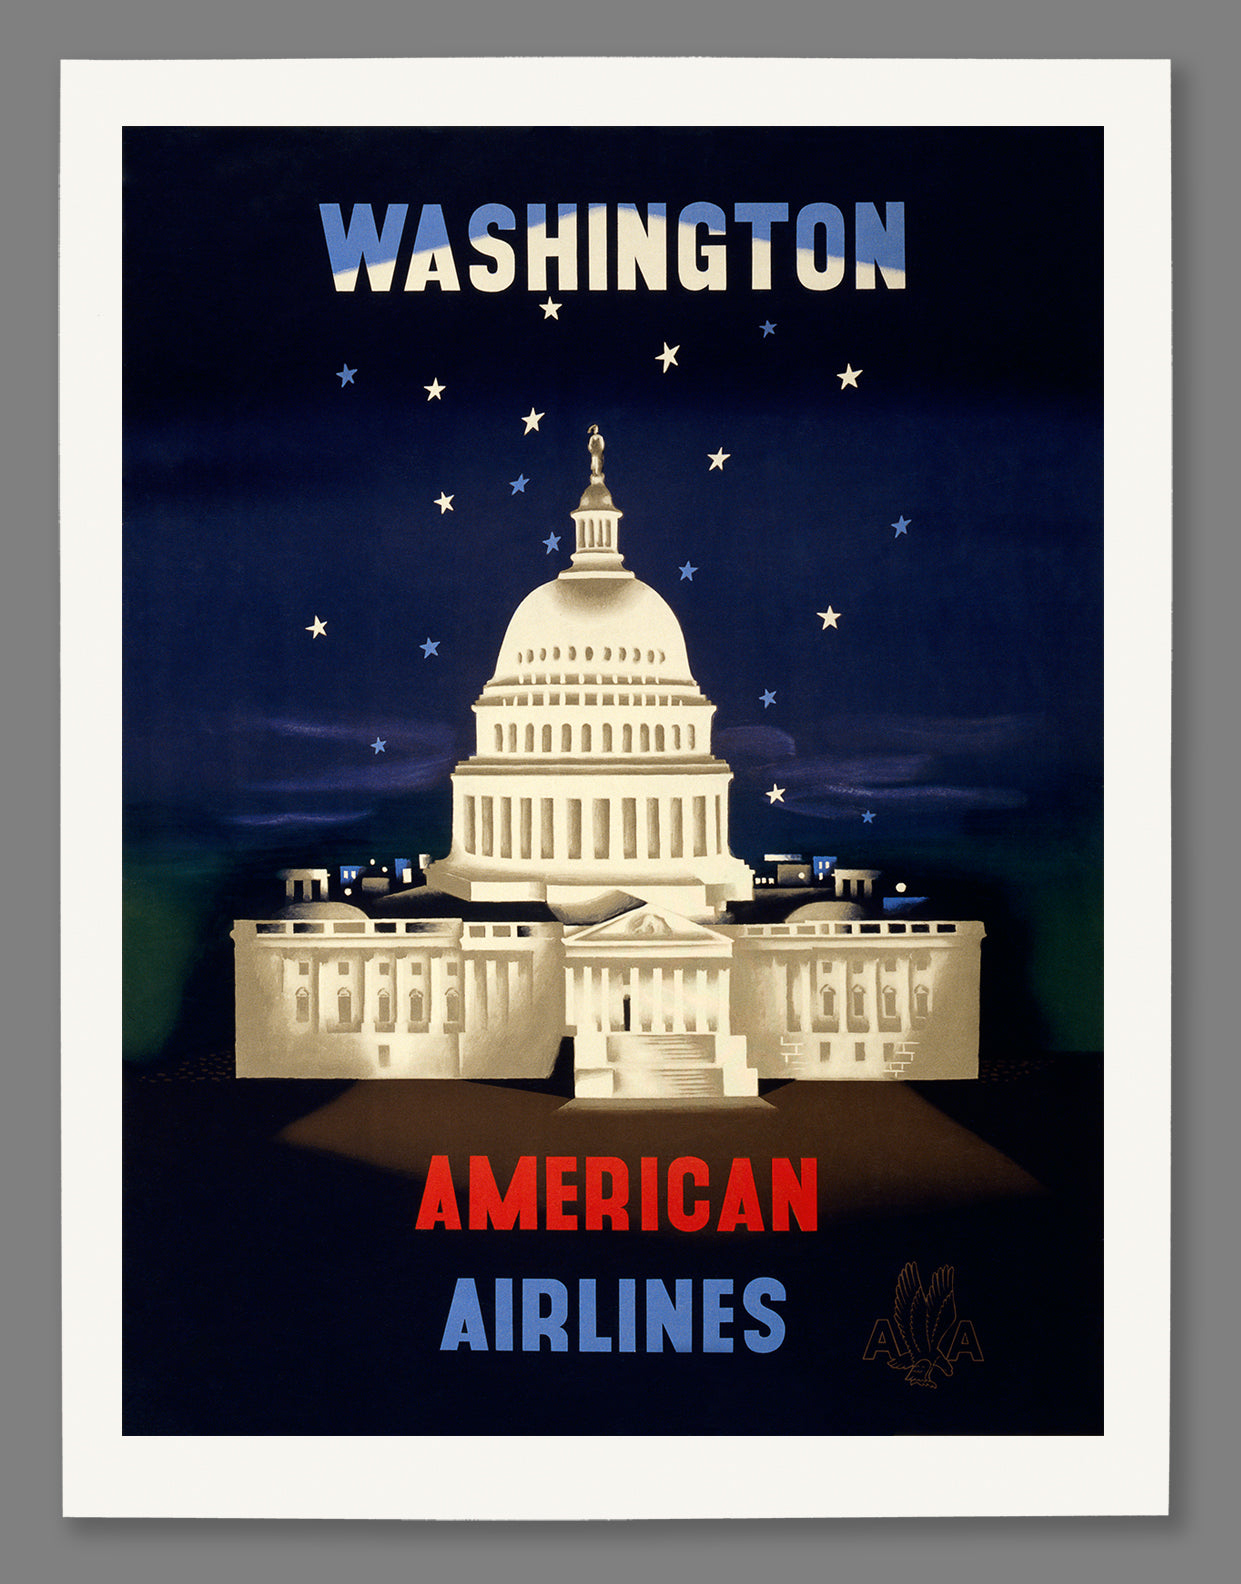 Paper print mockup of vintage travel poster for American Airlines to Washington DC